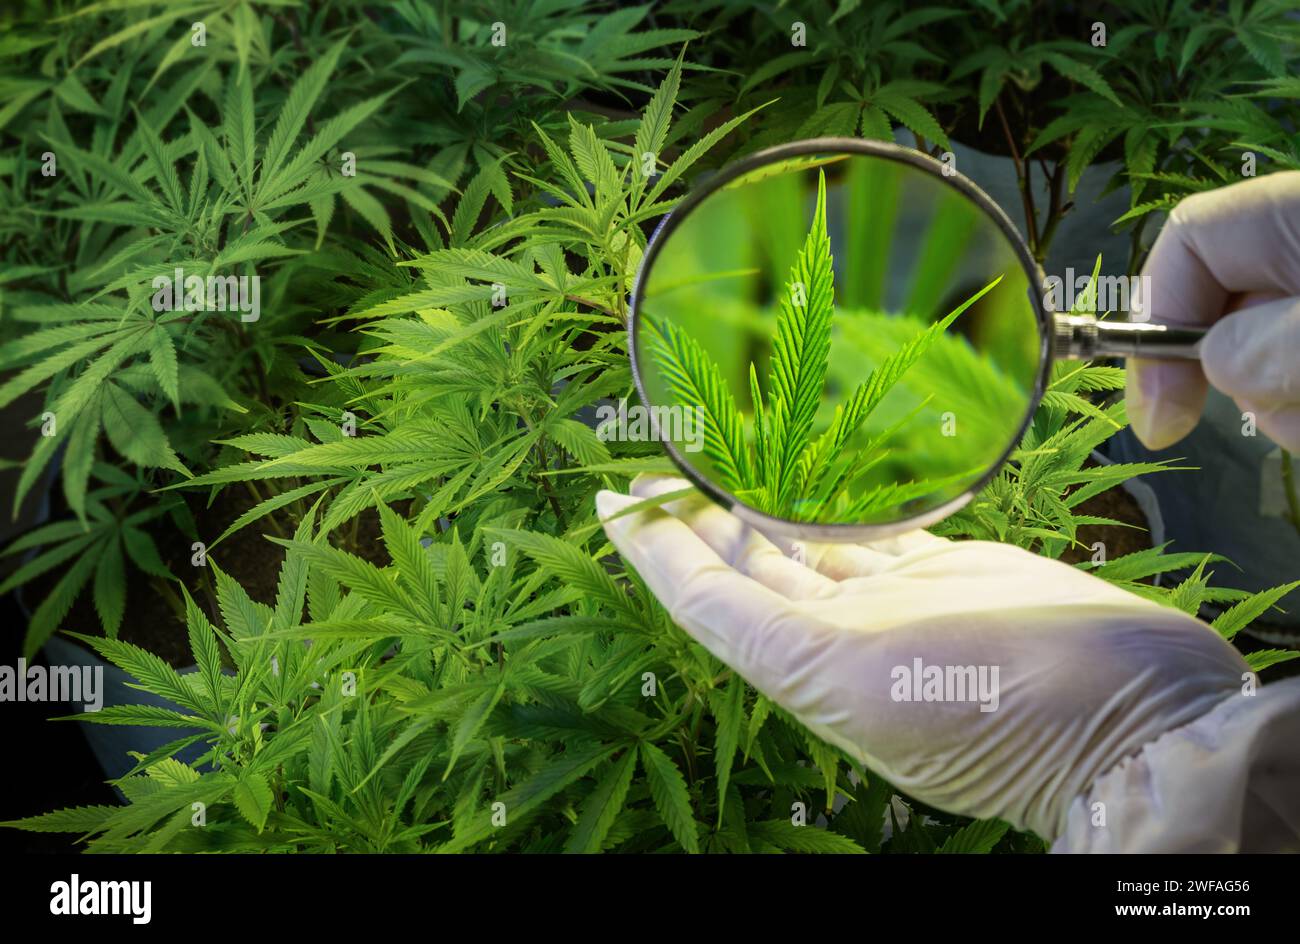 Hands in gloves examine a cannabis leaf through a magnifying glass. Stock Photo